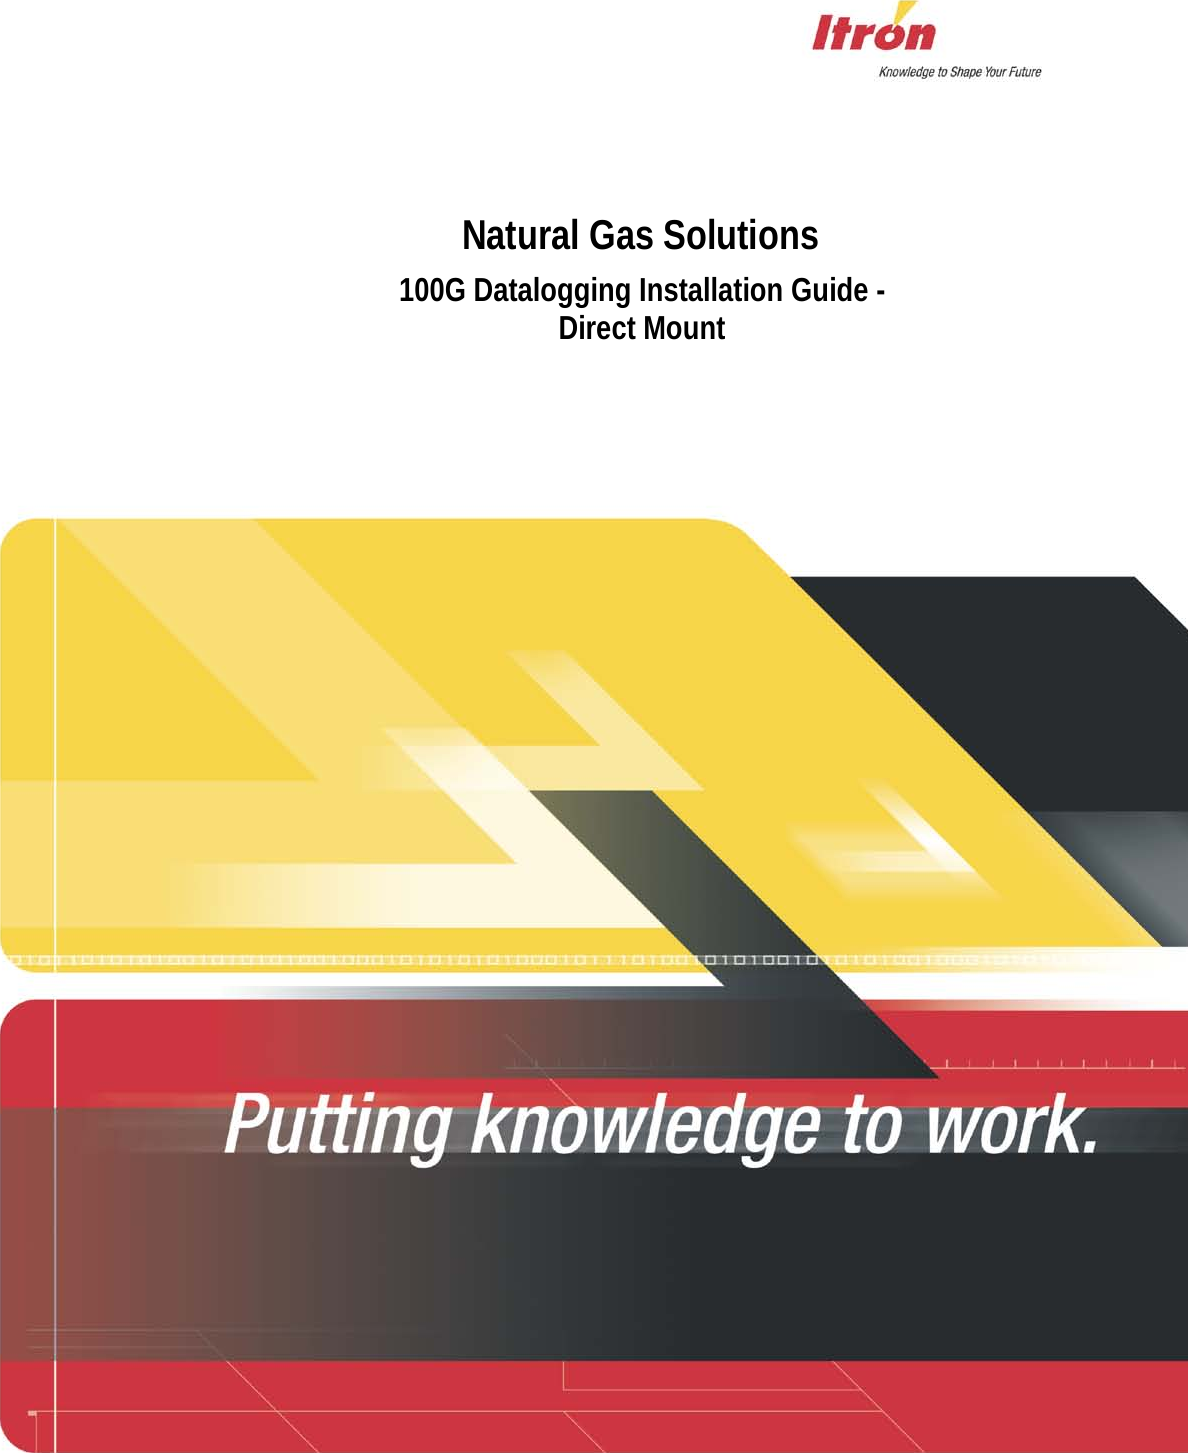    Natural Gas Solutions 100G Datalogging Installation Guide - Direct Mount     